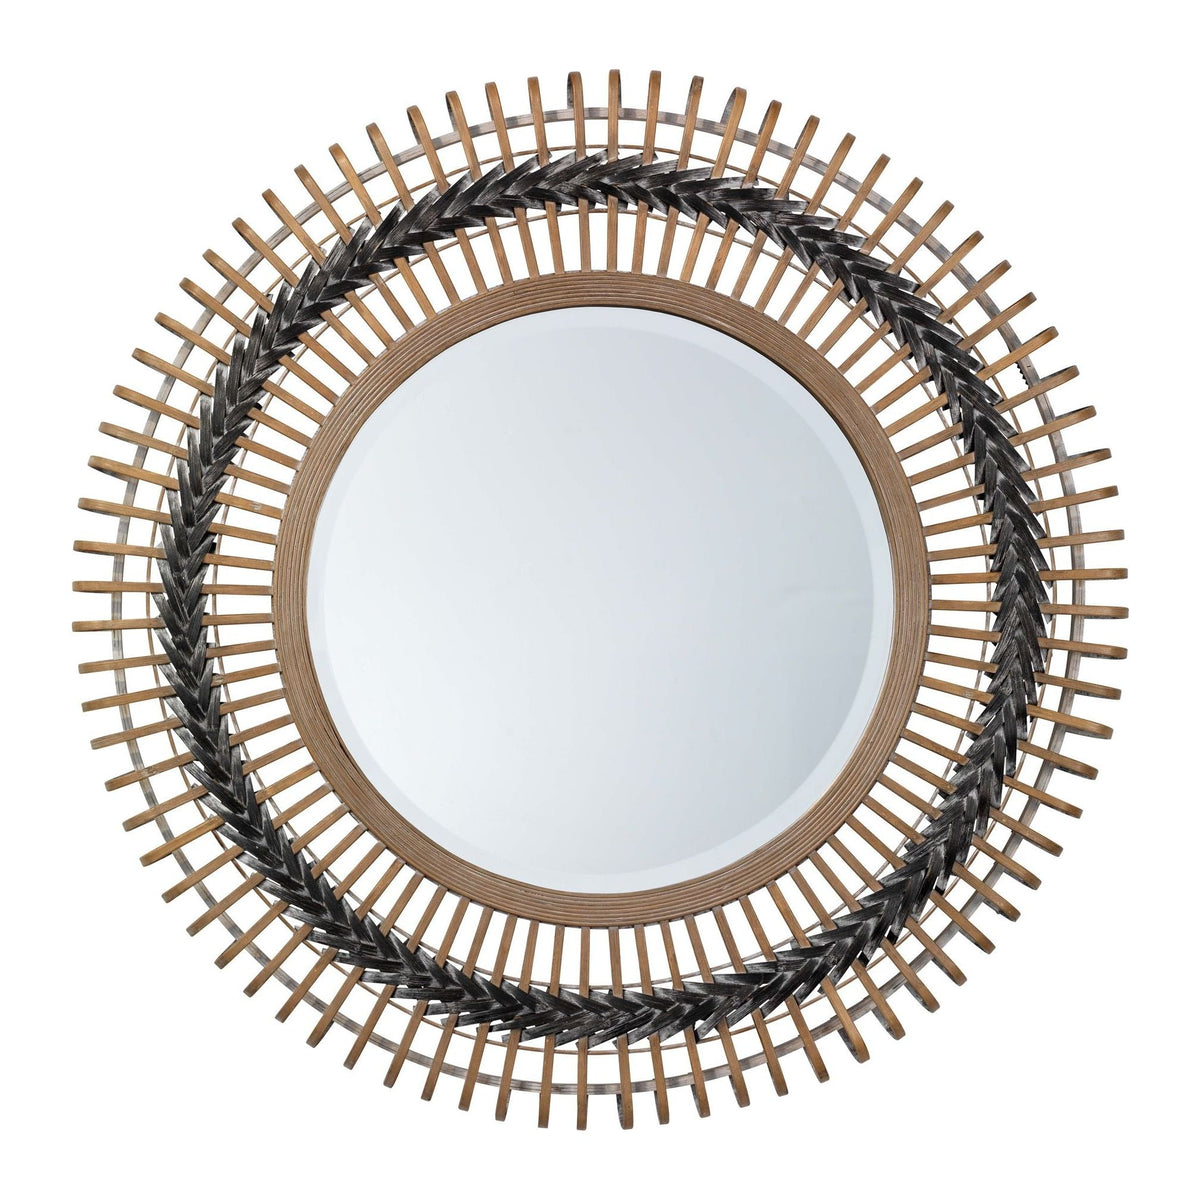 Jamie Young Company - LS6GROVMIGR - Grove Braided Mirror -  - Grey, Natural